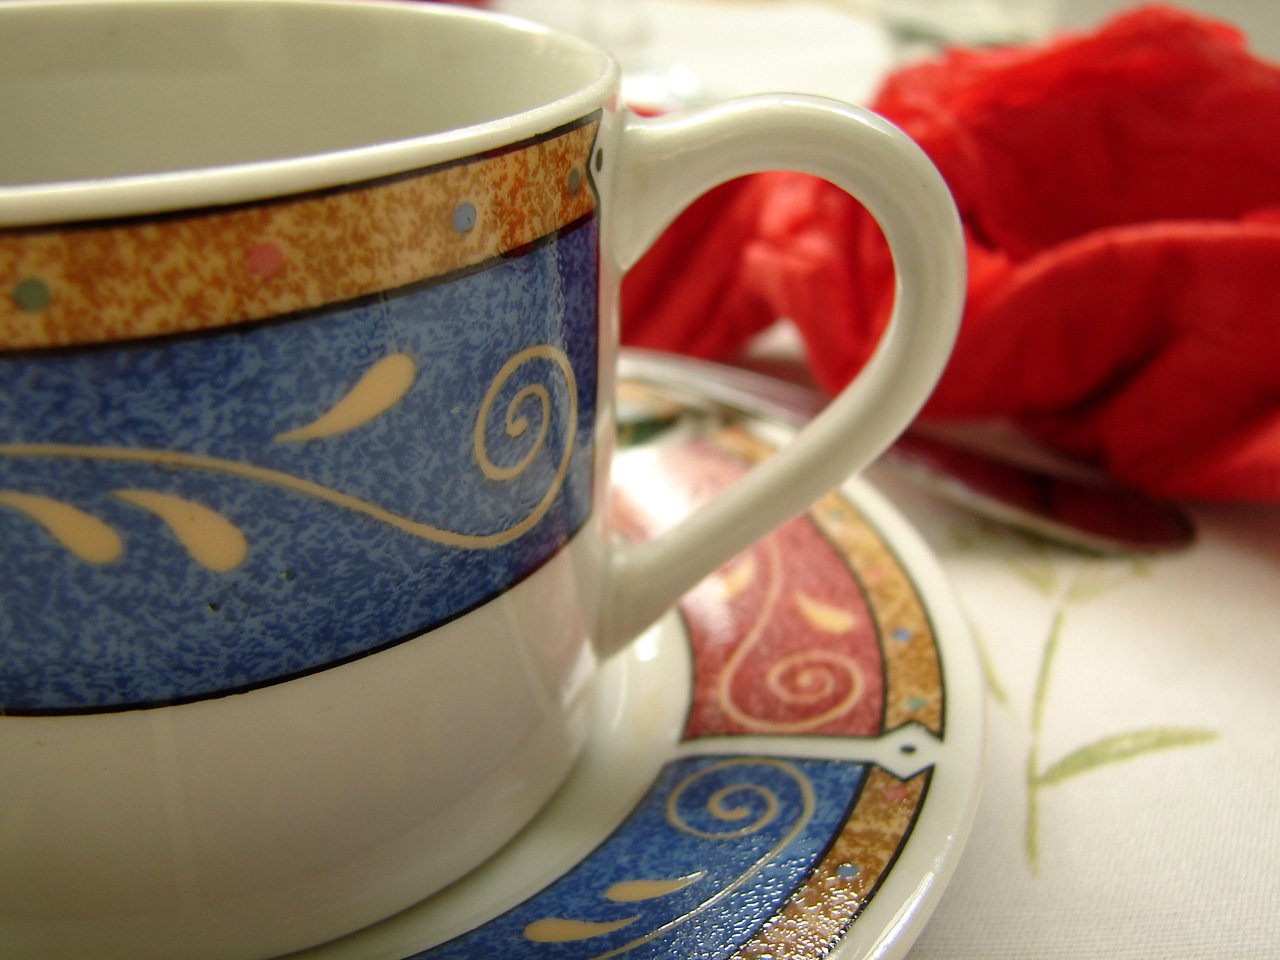 there is an image of a tea cup with a saucer